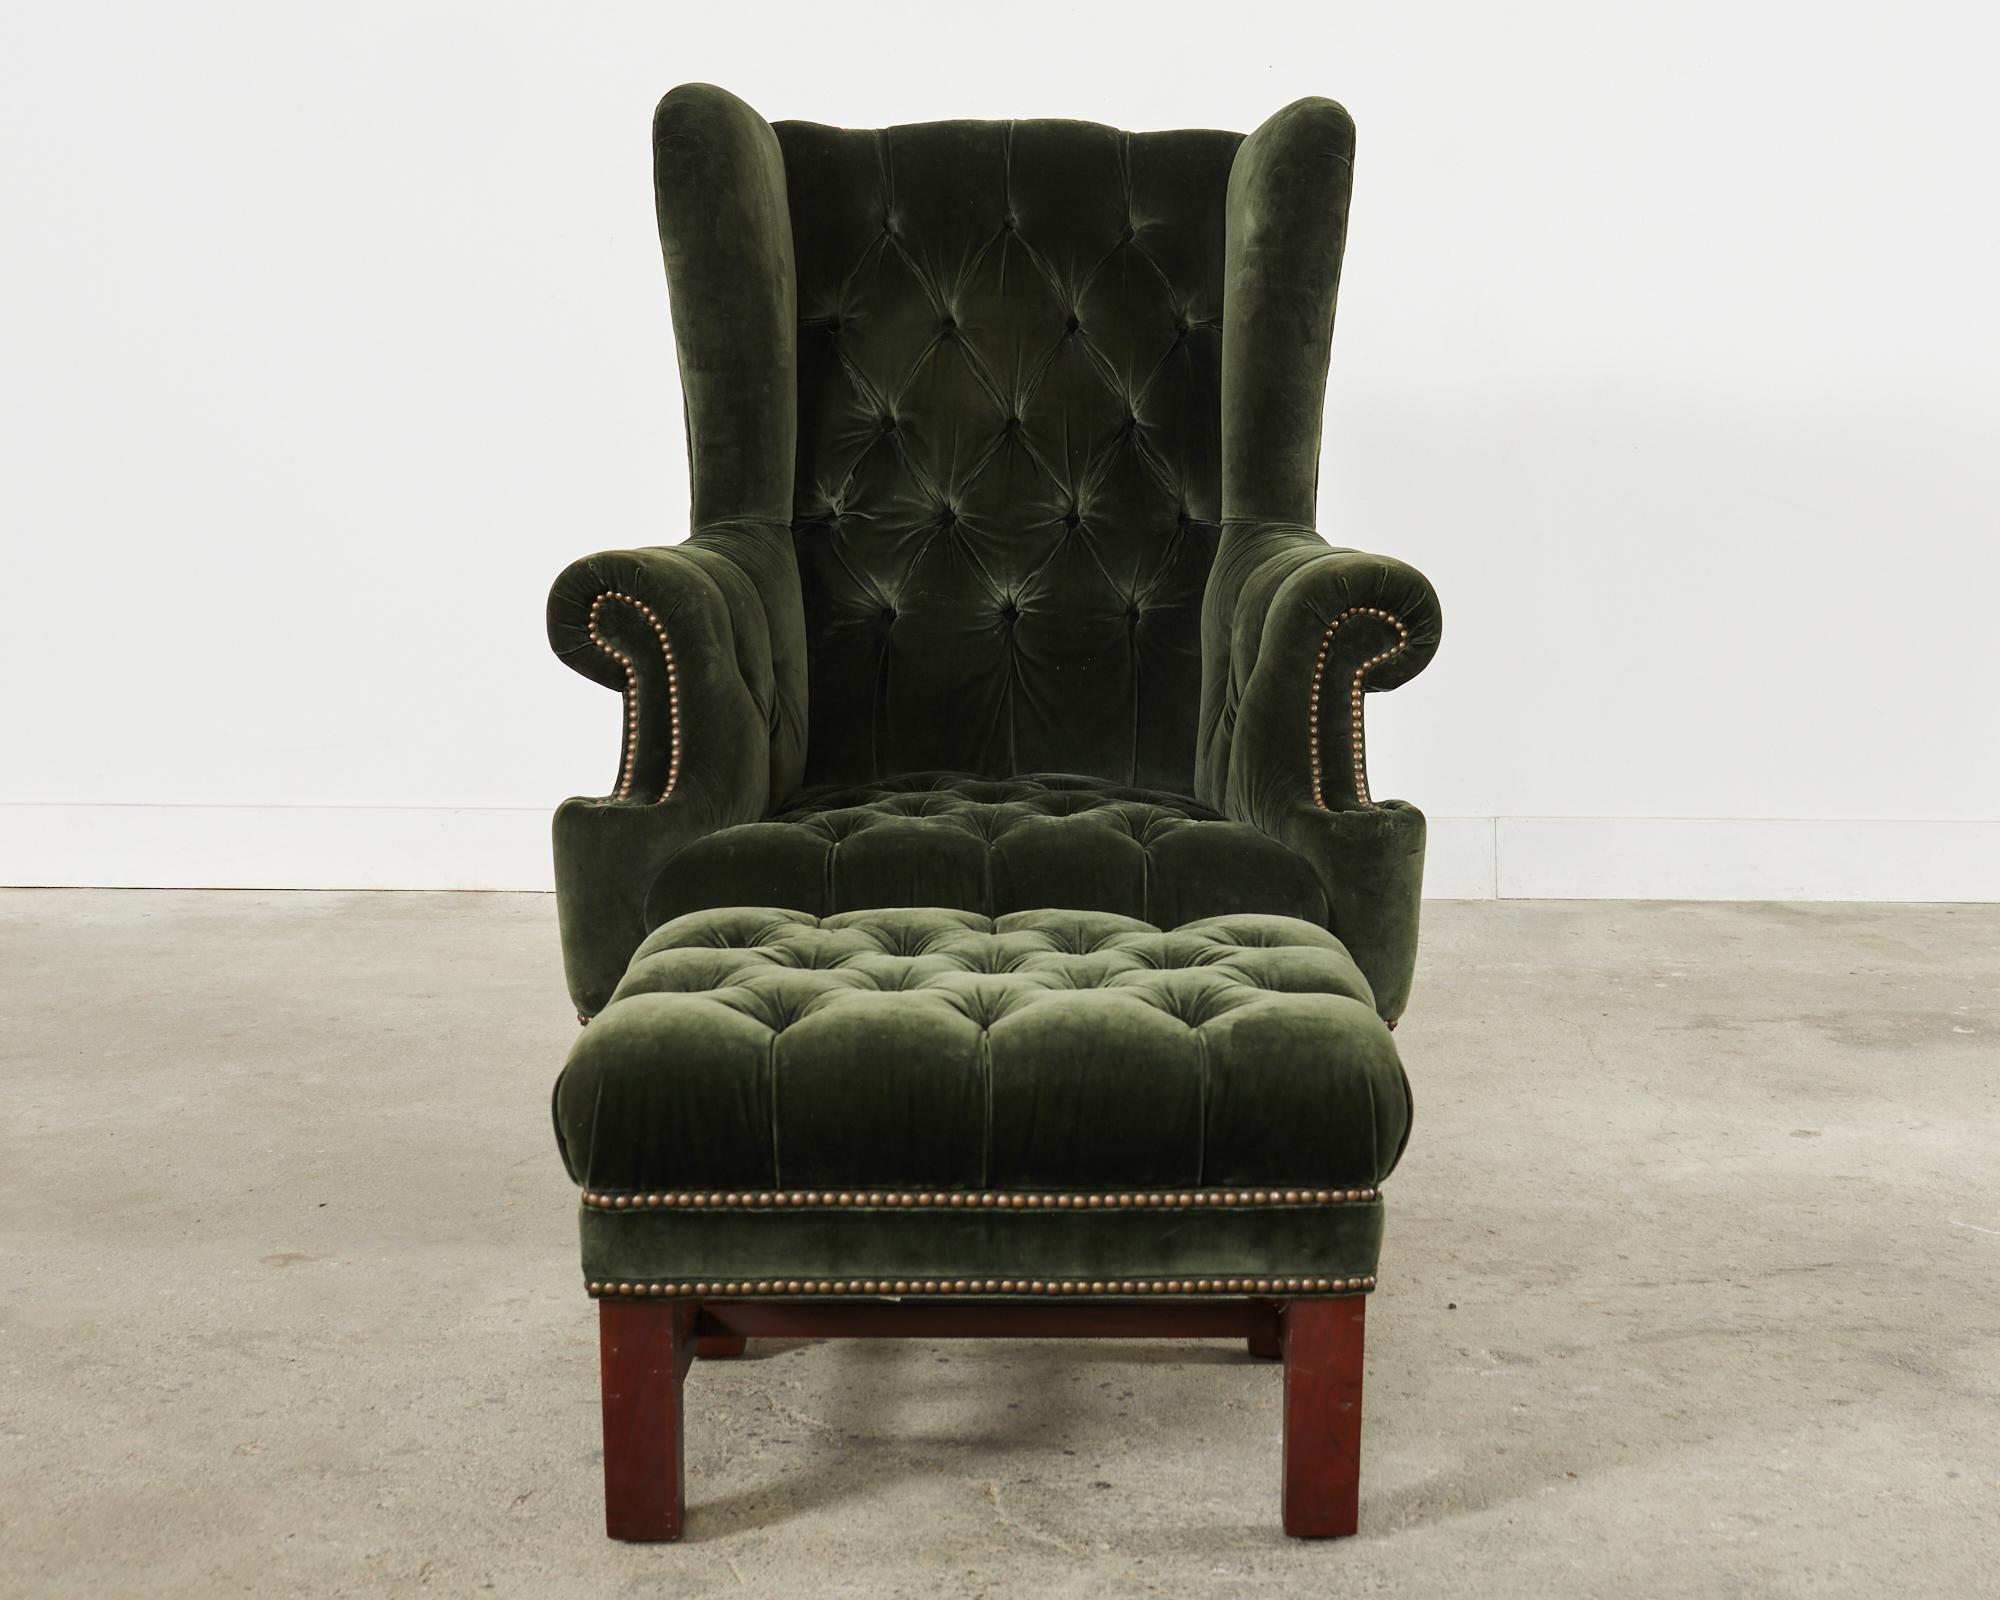 Patinated Ralph Lauren English Georgian Style Devonshire Wingback Chair and Ottoman For Sale